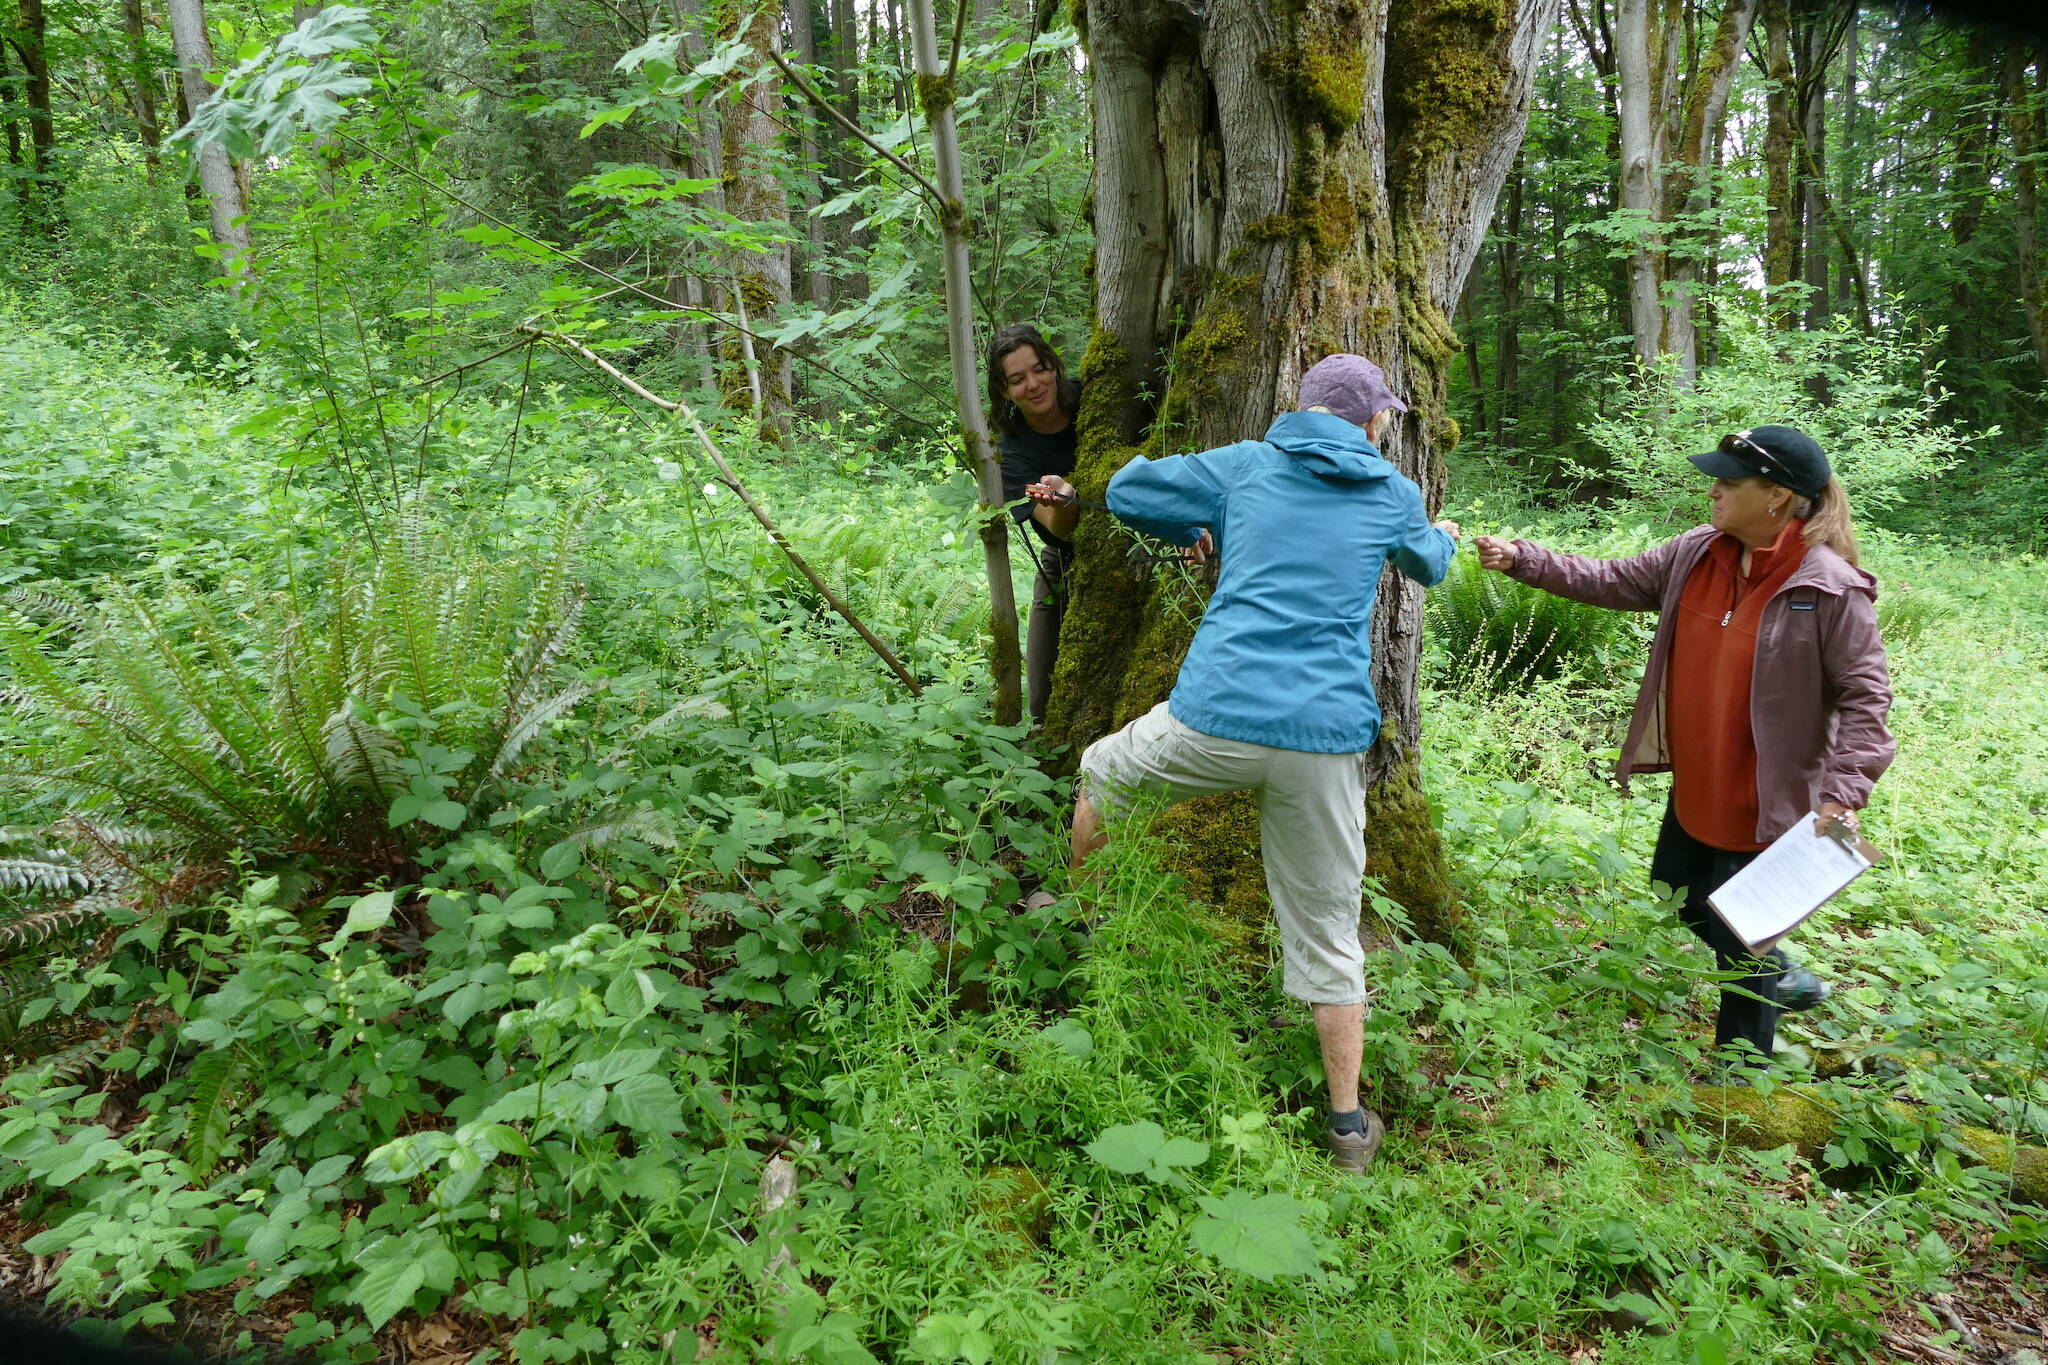 Carly Lloyd, left, shows volunteers how to calculate the diameter of trees. (Photo provided by Julie Titone)